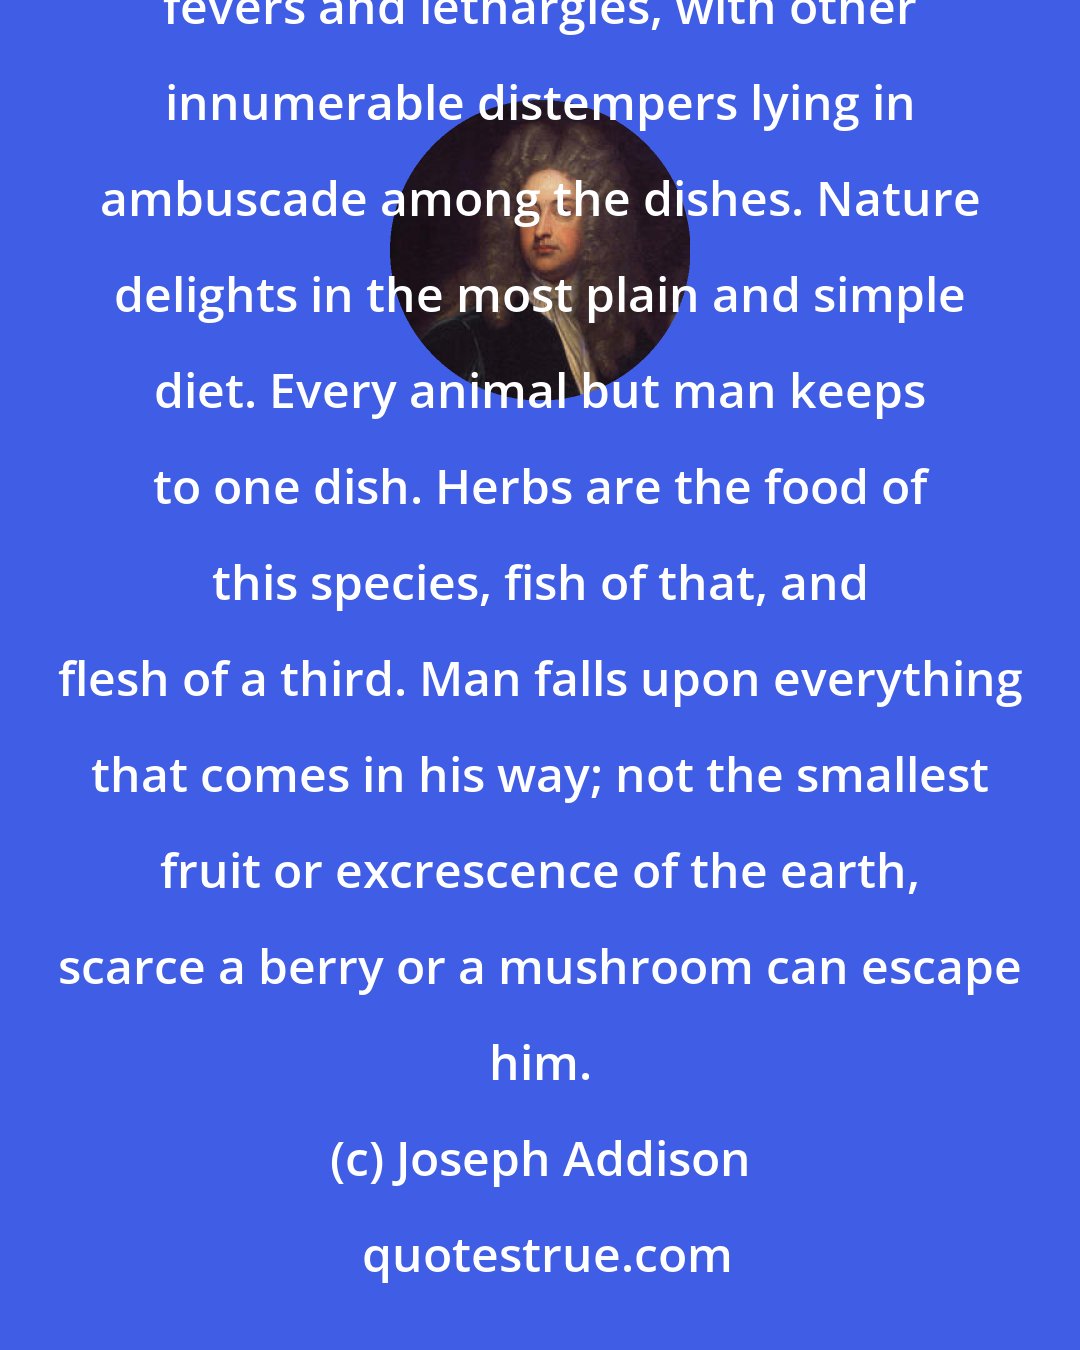 Joseph Addison: When I behold a fashionable table set out in all its magnificence, I fancy that I see gouts and dropsies, fevers and lethargies, with other innumerable distempers lying in ambuscade among the dishes. Nature delights in the most plain and simple diet. Every animal but man keeps to one dish. Herbs are the food of this species, fish of that, and flesh of a third. Man falls upon everything that comes in his way; not the smallest fruit or excrescence of the earth, scarce a berry or a mushroom can escape him.